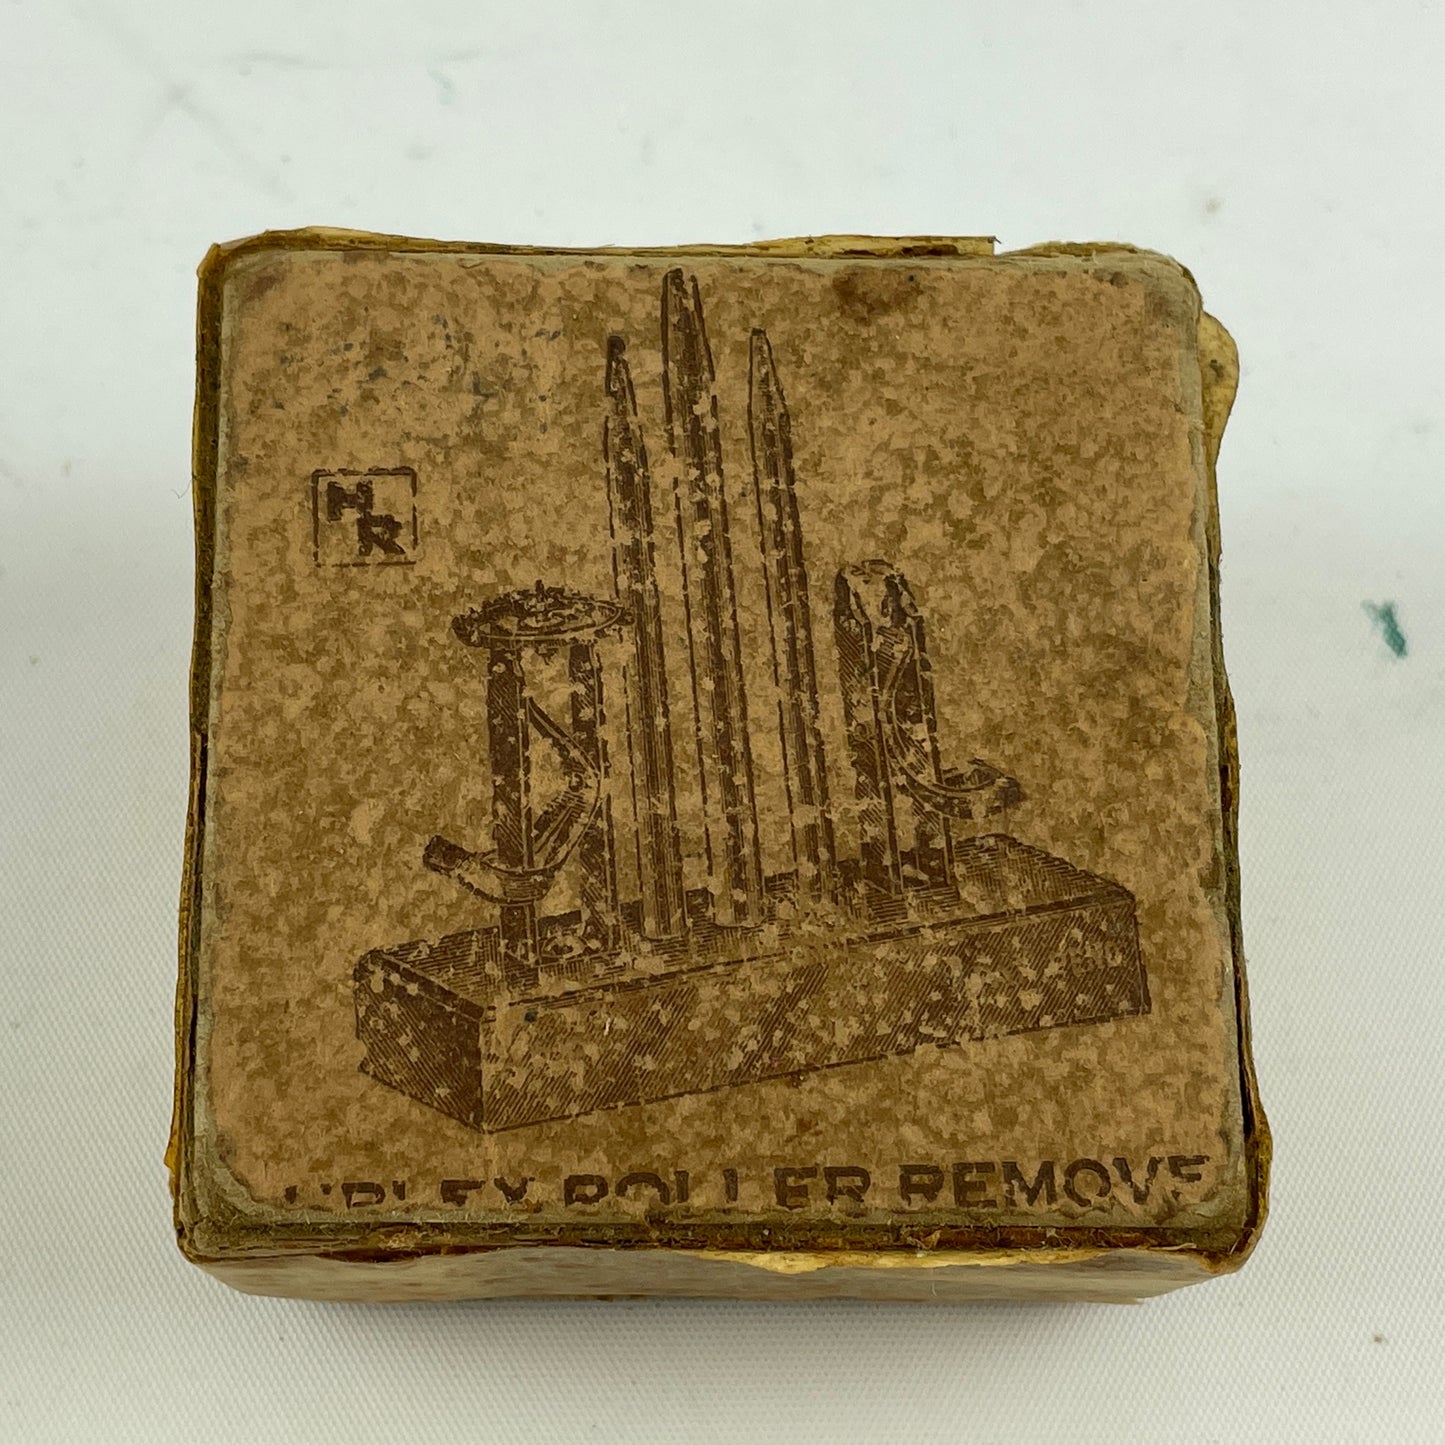 Feb Lot 17- Watchmaker’s Boxed “ROLLER REMOVER”